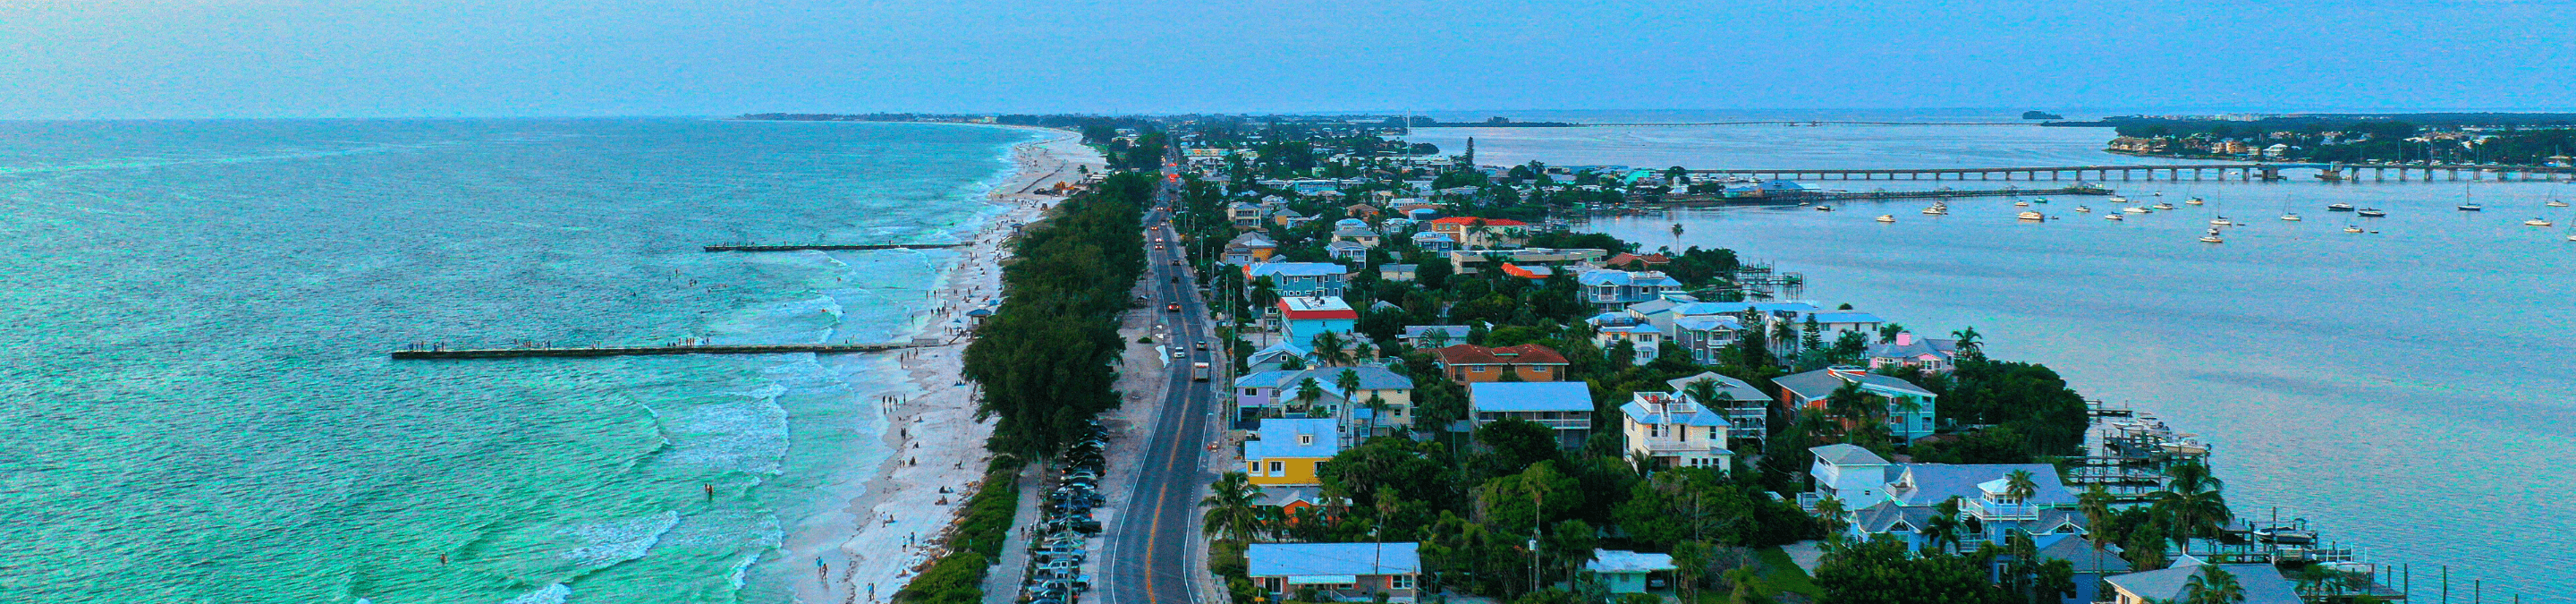 aerial view from drone looking down at Bradenton Beach on Anna Maria Island as the sun begins to set with the Gulf on the left and bay on the right with various houses in the middle of the island